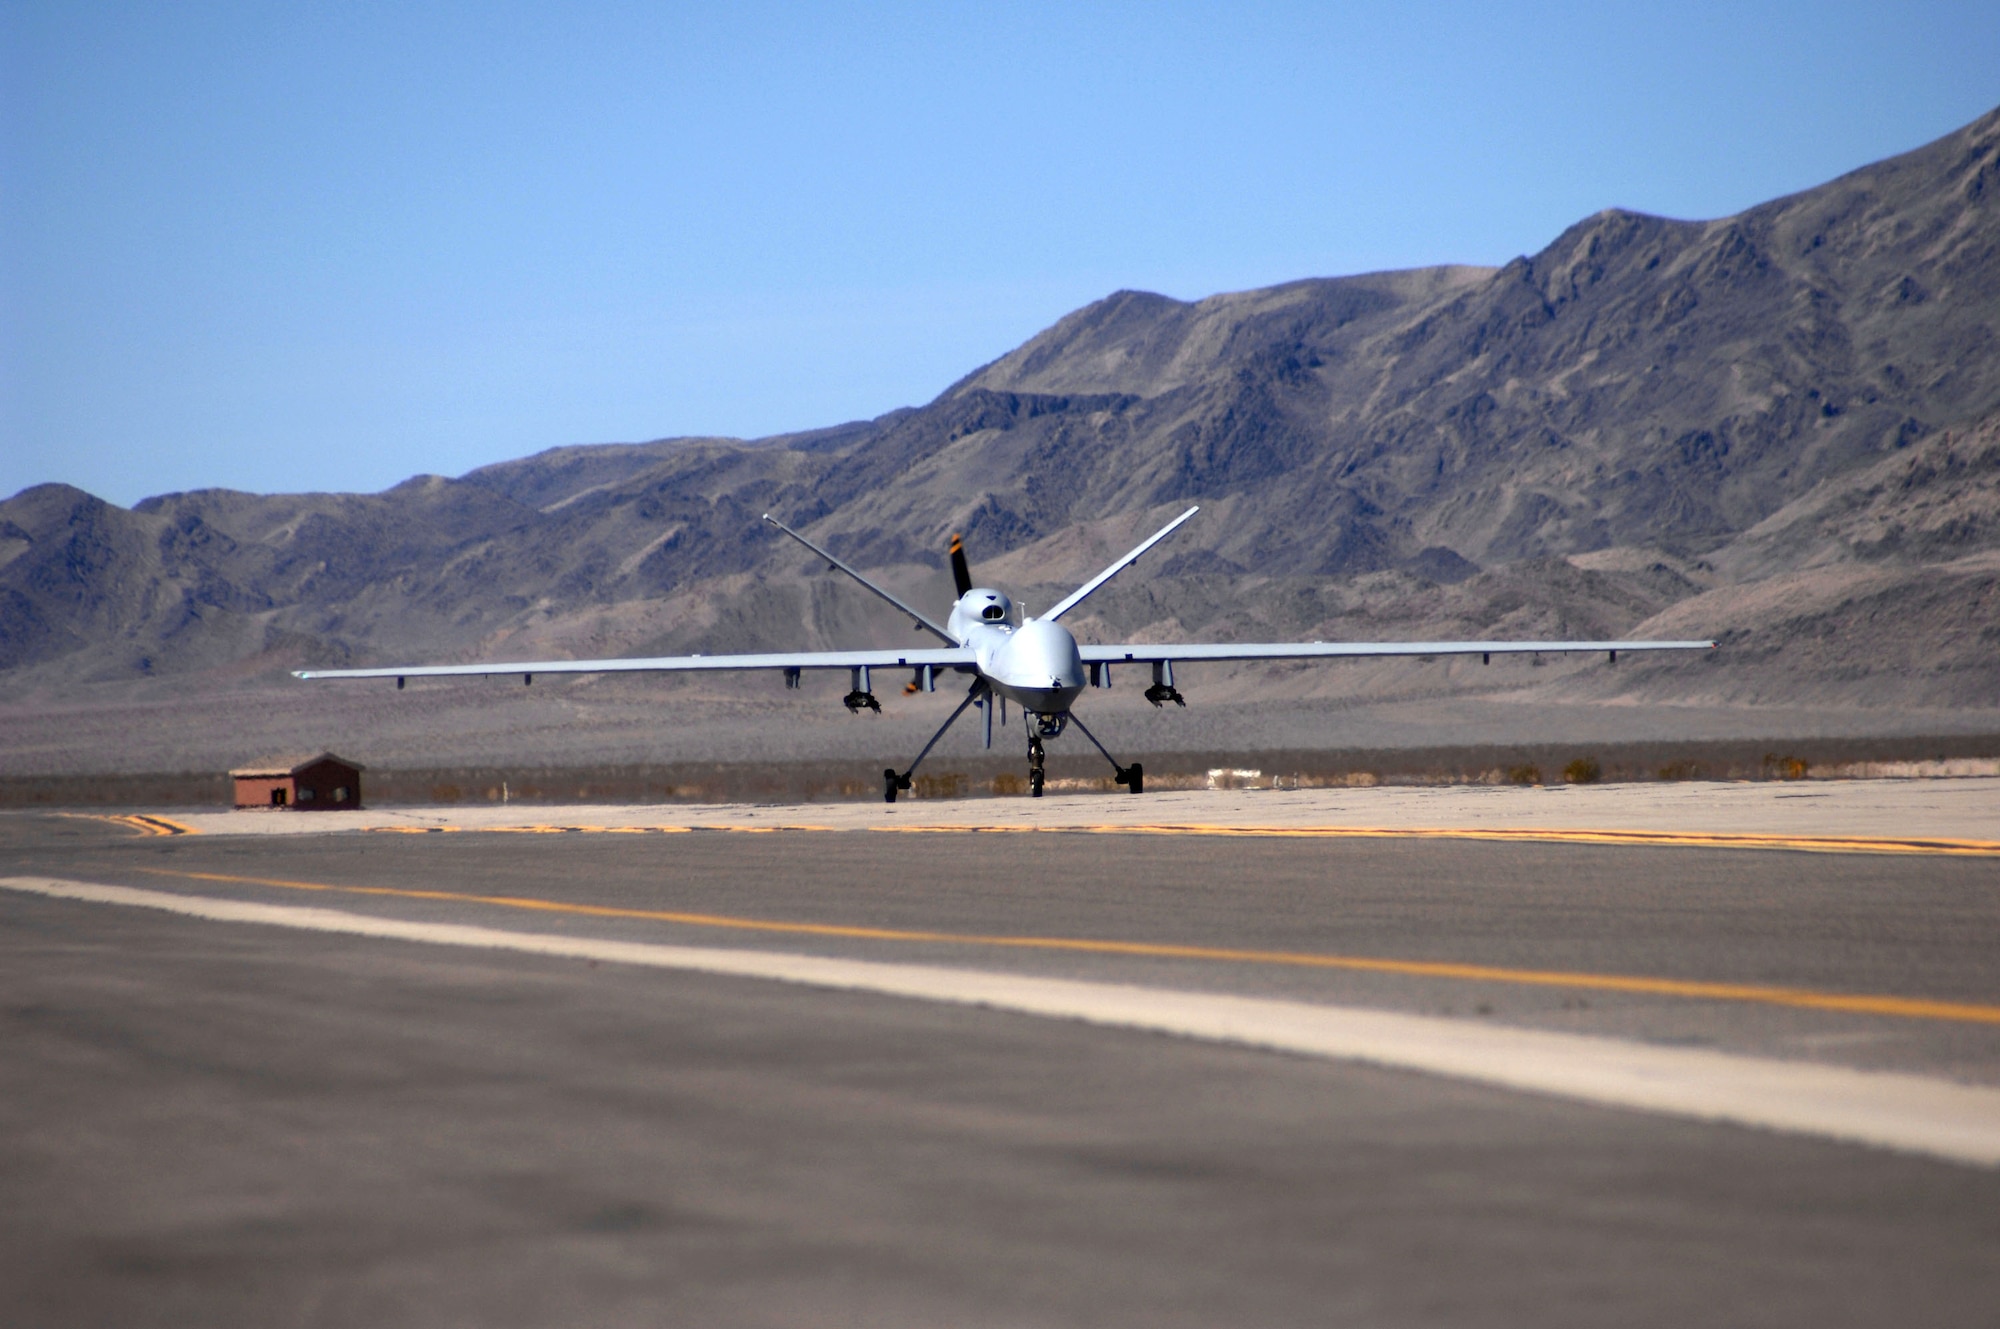 An MQ-9 Reaper Unmanned Aerial Vehicle taxis into Creech Air Force Base, Nev., March 13. It is the first operational airframe of its kind to land here. This Reaper is the first of many to be assigned to the 42nd Attack Squadron. (U.S Air Force photo/Senior Airman Larry E. Reid Jr.)

